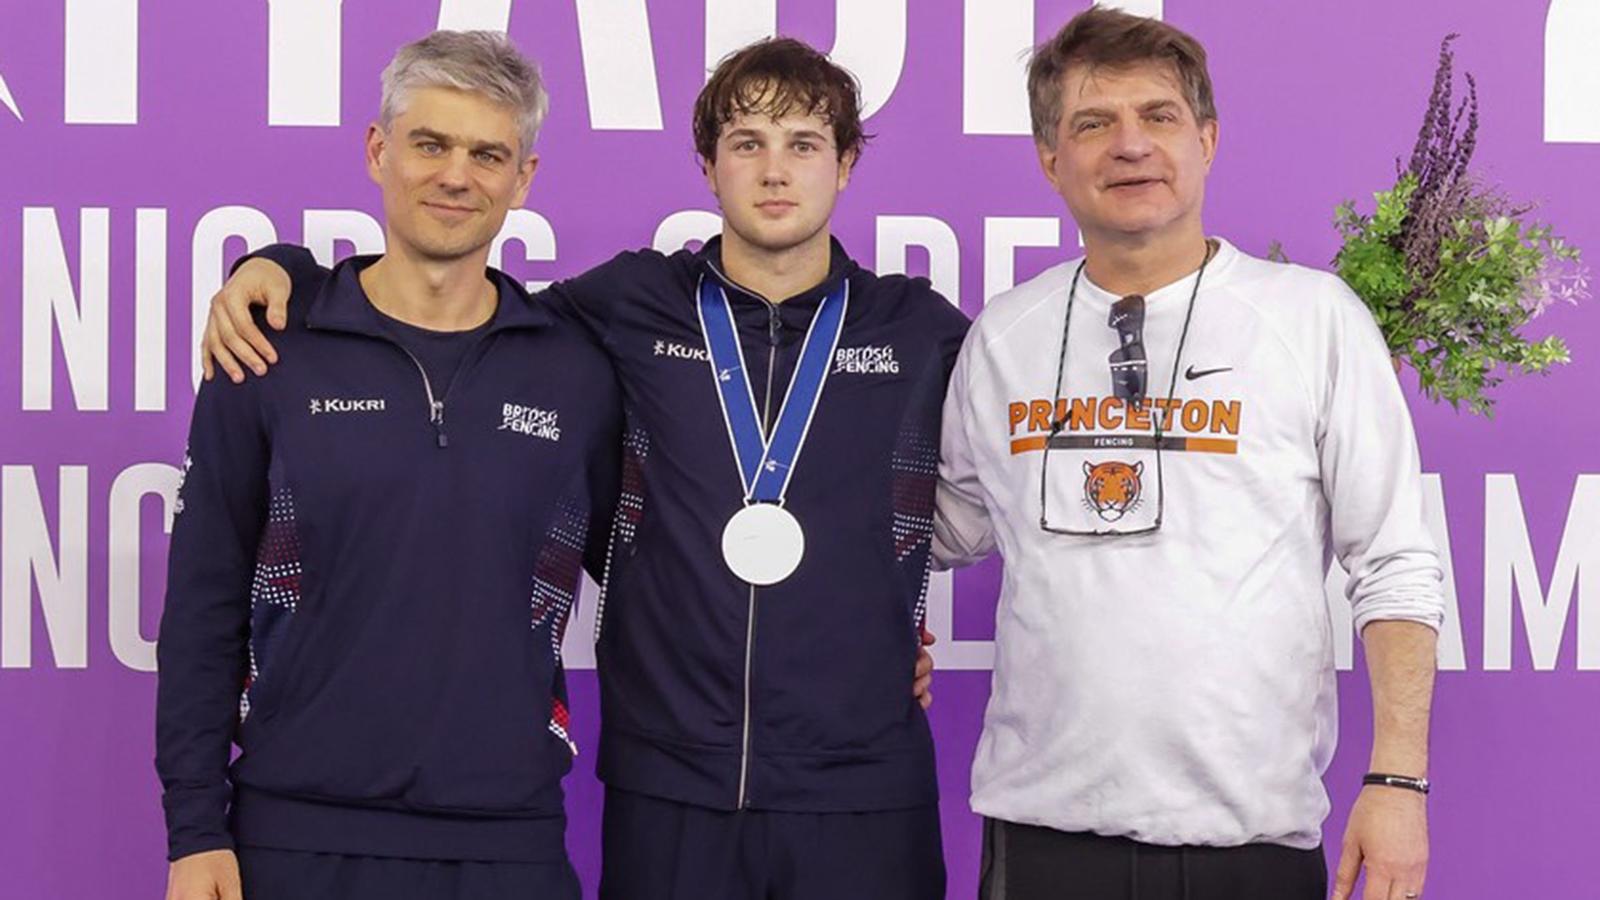 Princeton Fencer Alec Brooke Takes Silver at Junior World Championships, While Teammate Tatiana Nazlymov Shines in Women’s Saber Competition